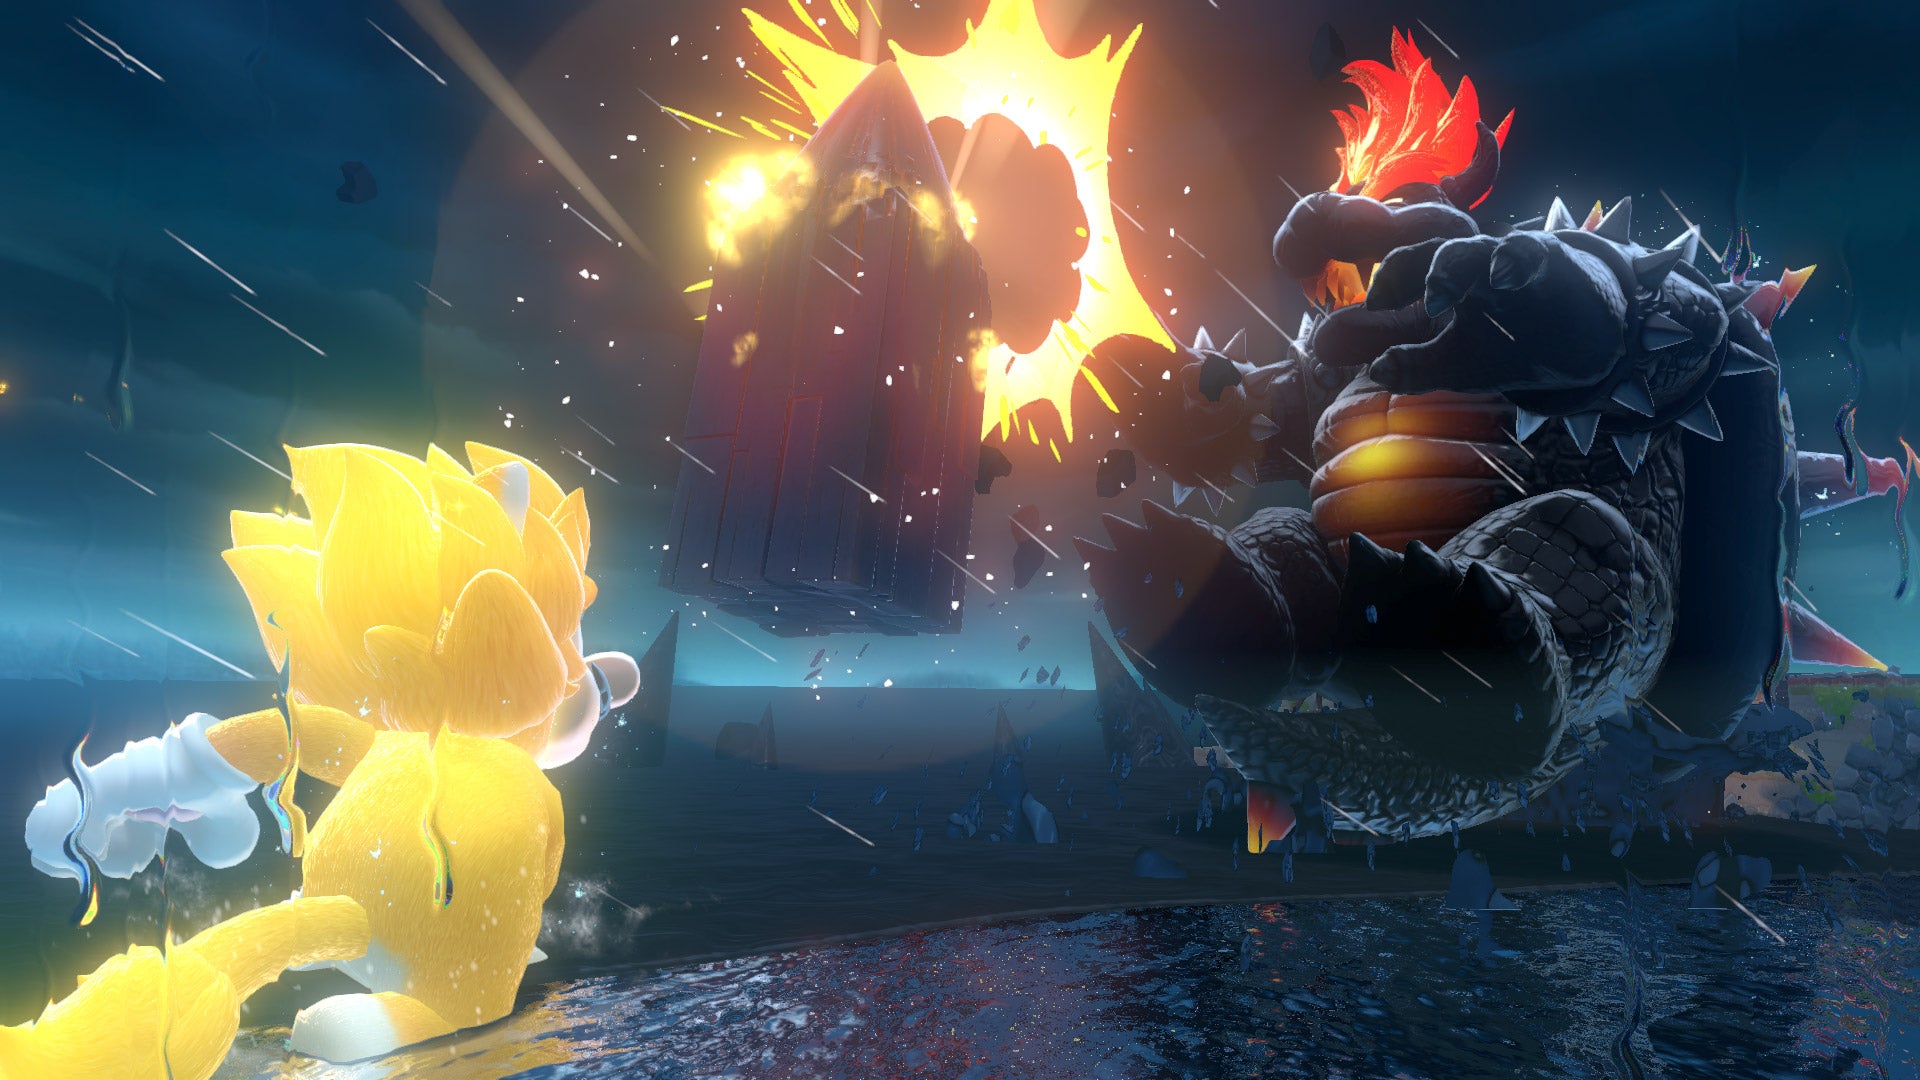 Super Mario 3D World Bowsers Fury - Review: Super Mario 3D World + Bowser's  Fury - The Enemy